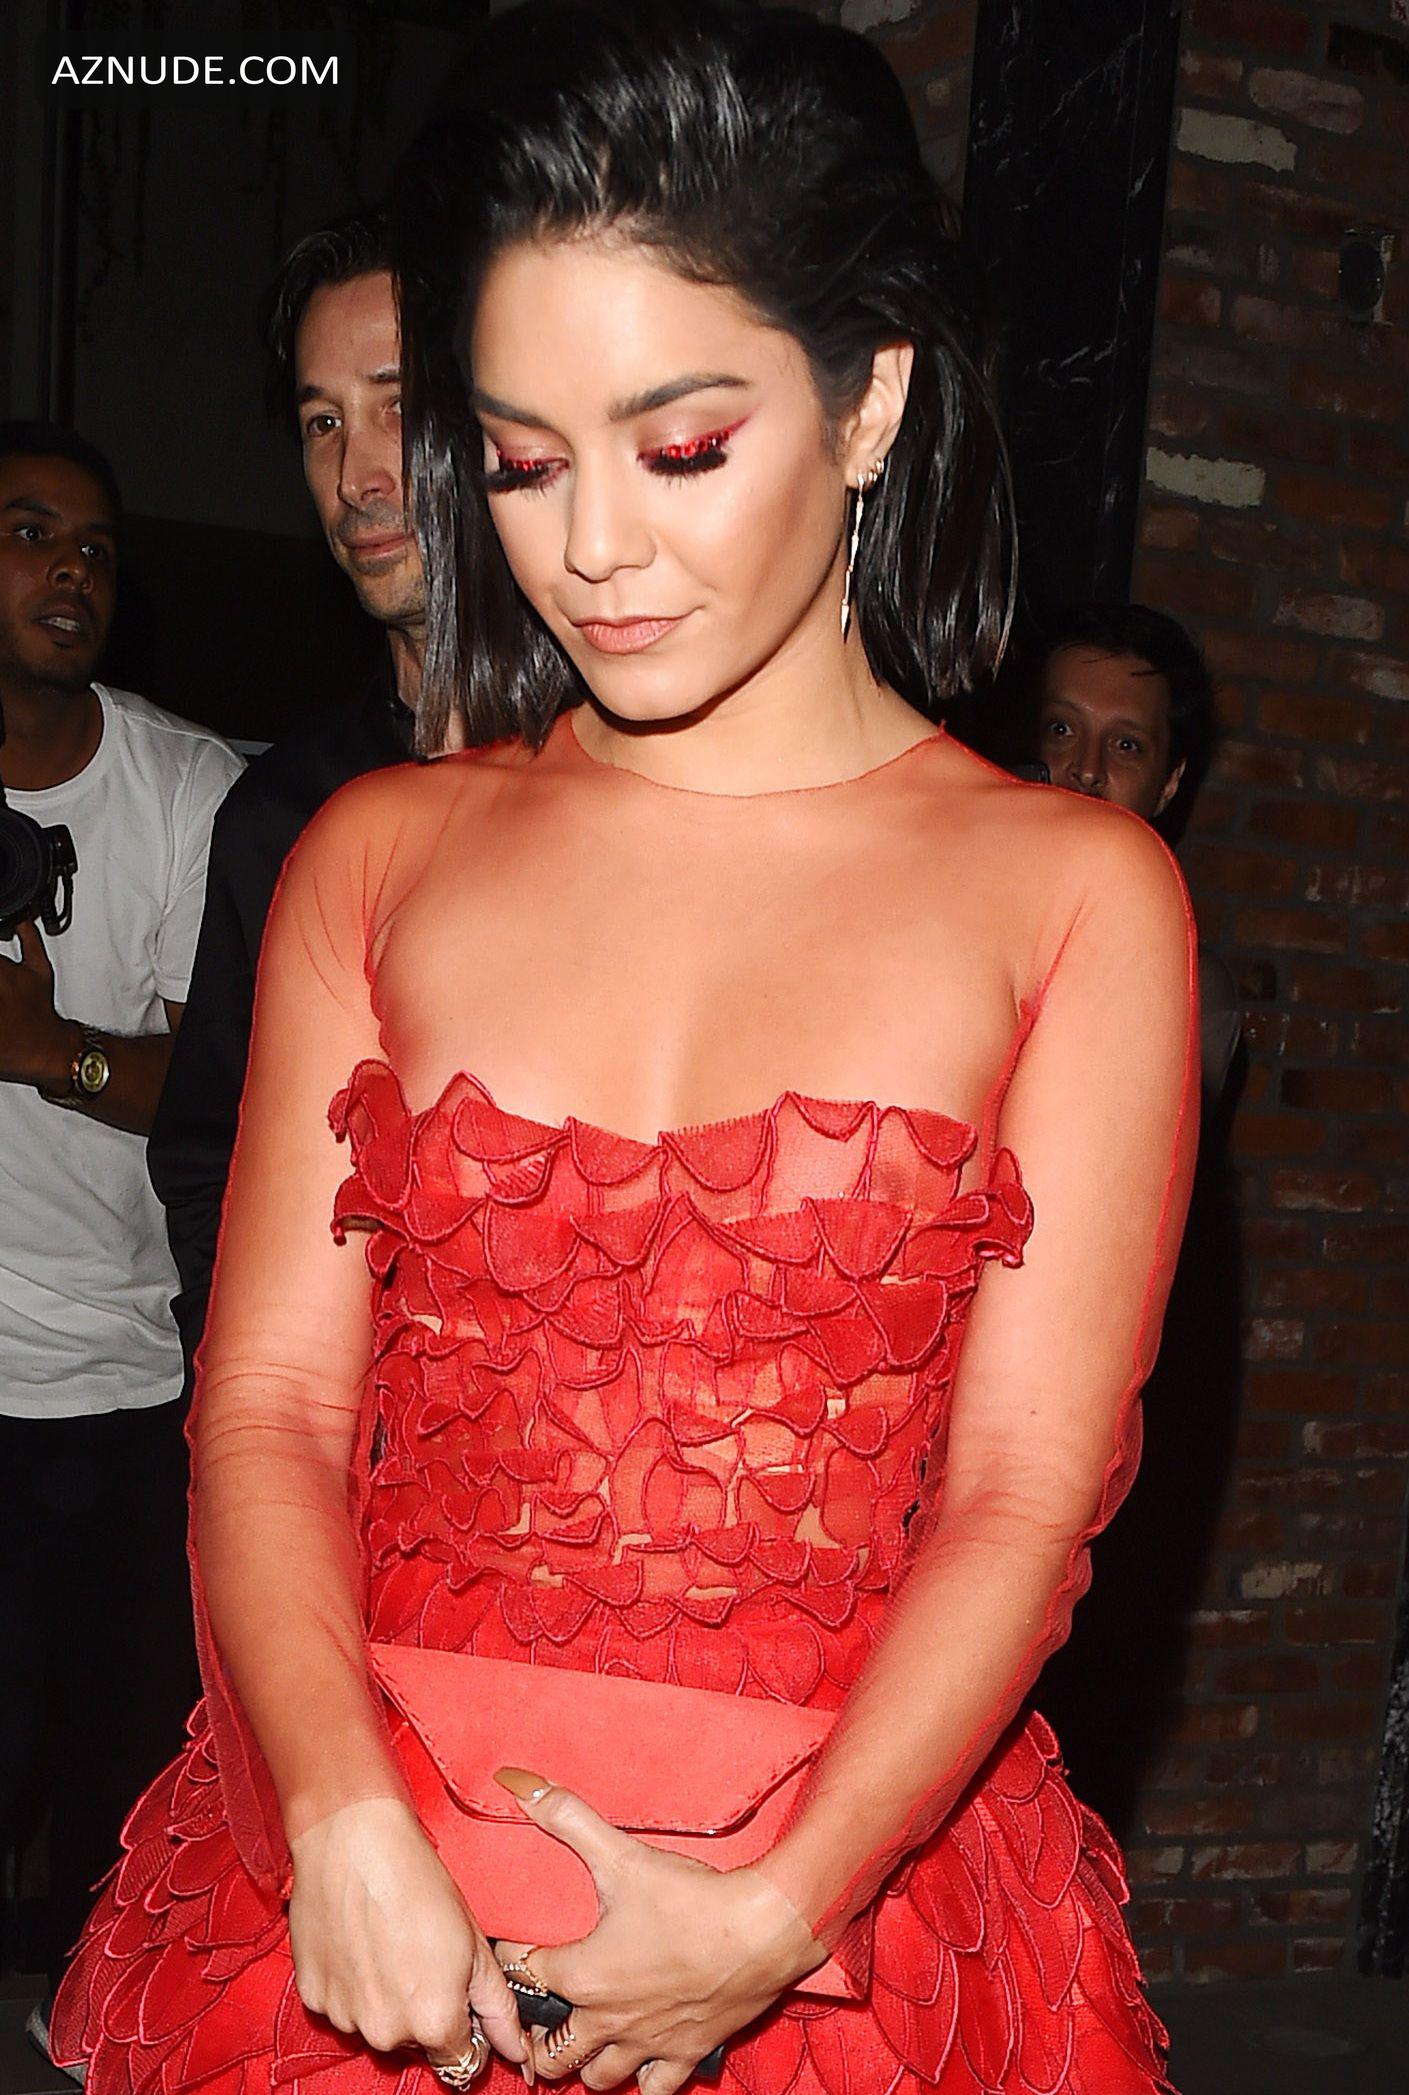 Vanessa Hudgens Red Sheer Dress At The Republic Records Party In Los Angeles Aznude